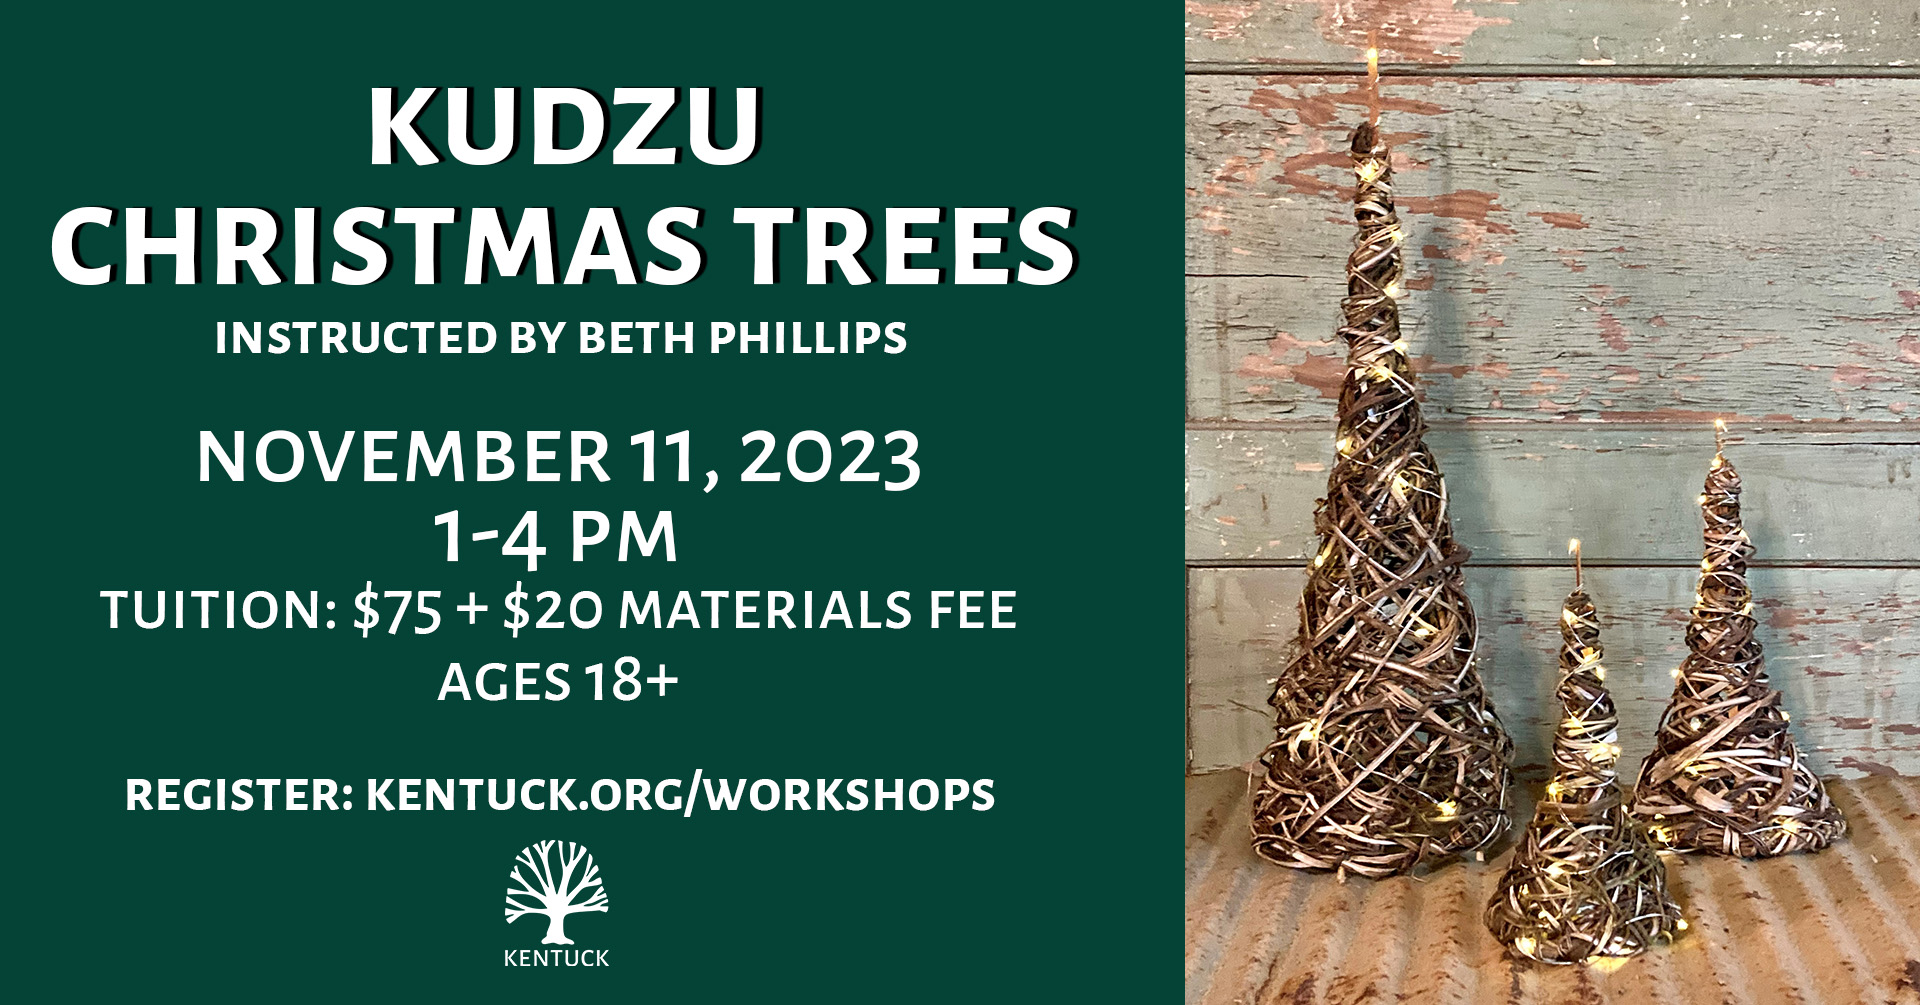 Kudzu Christmas Trees with Beth Phillips cover image